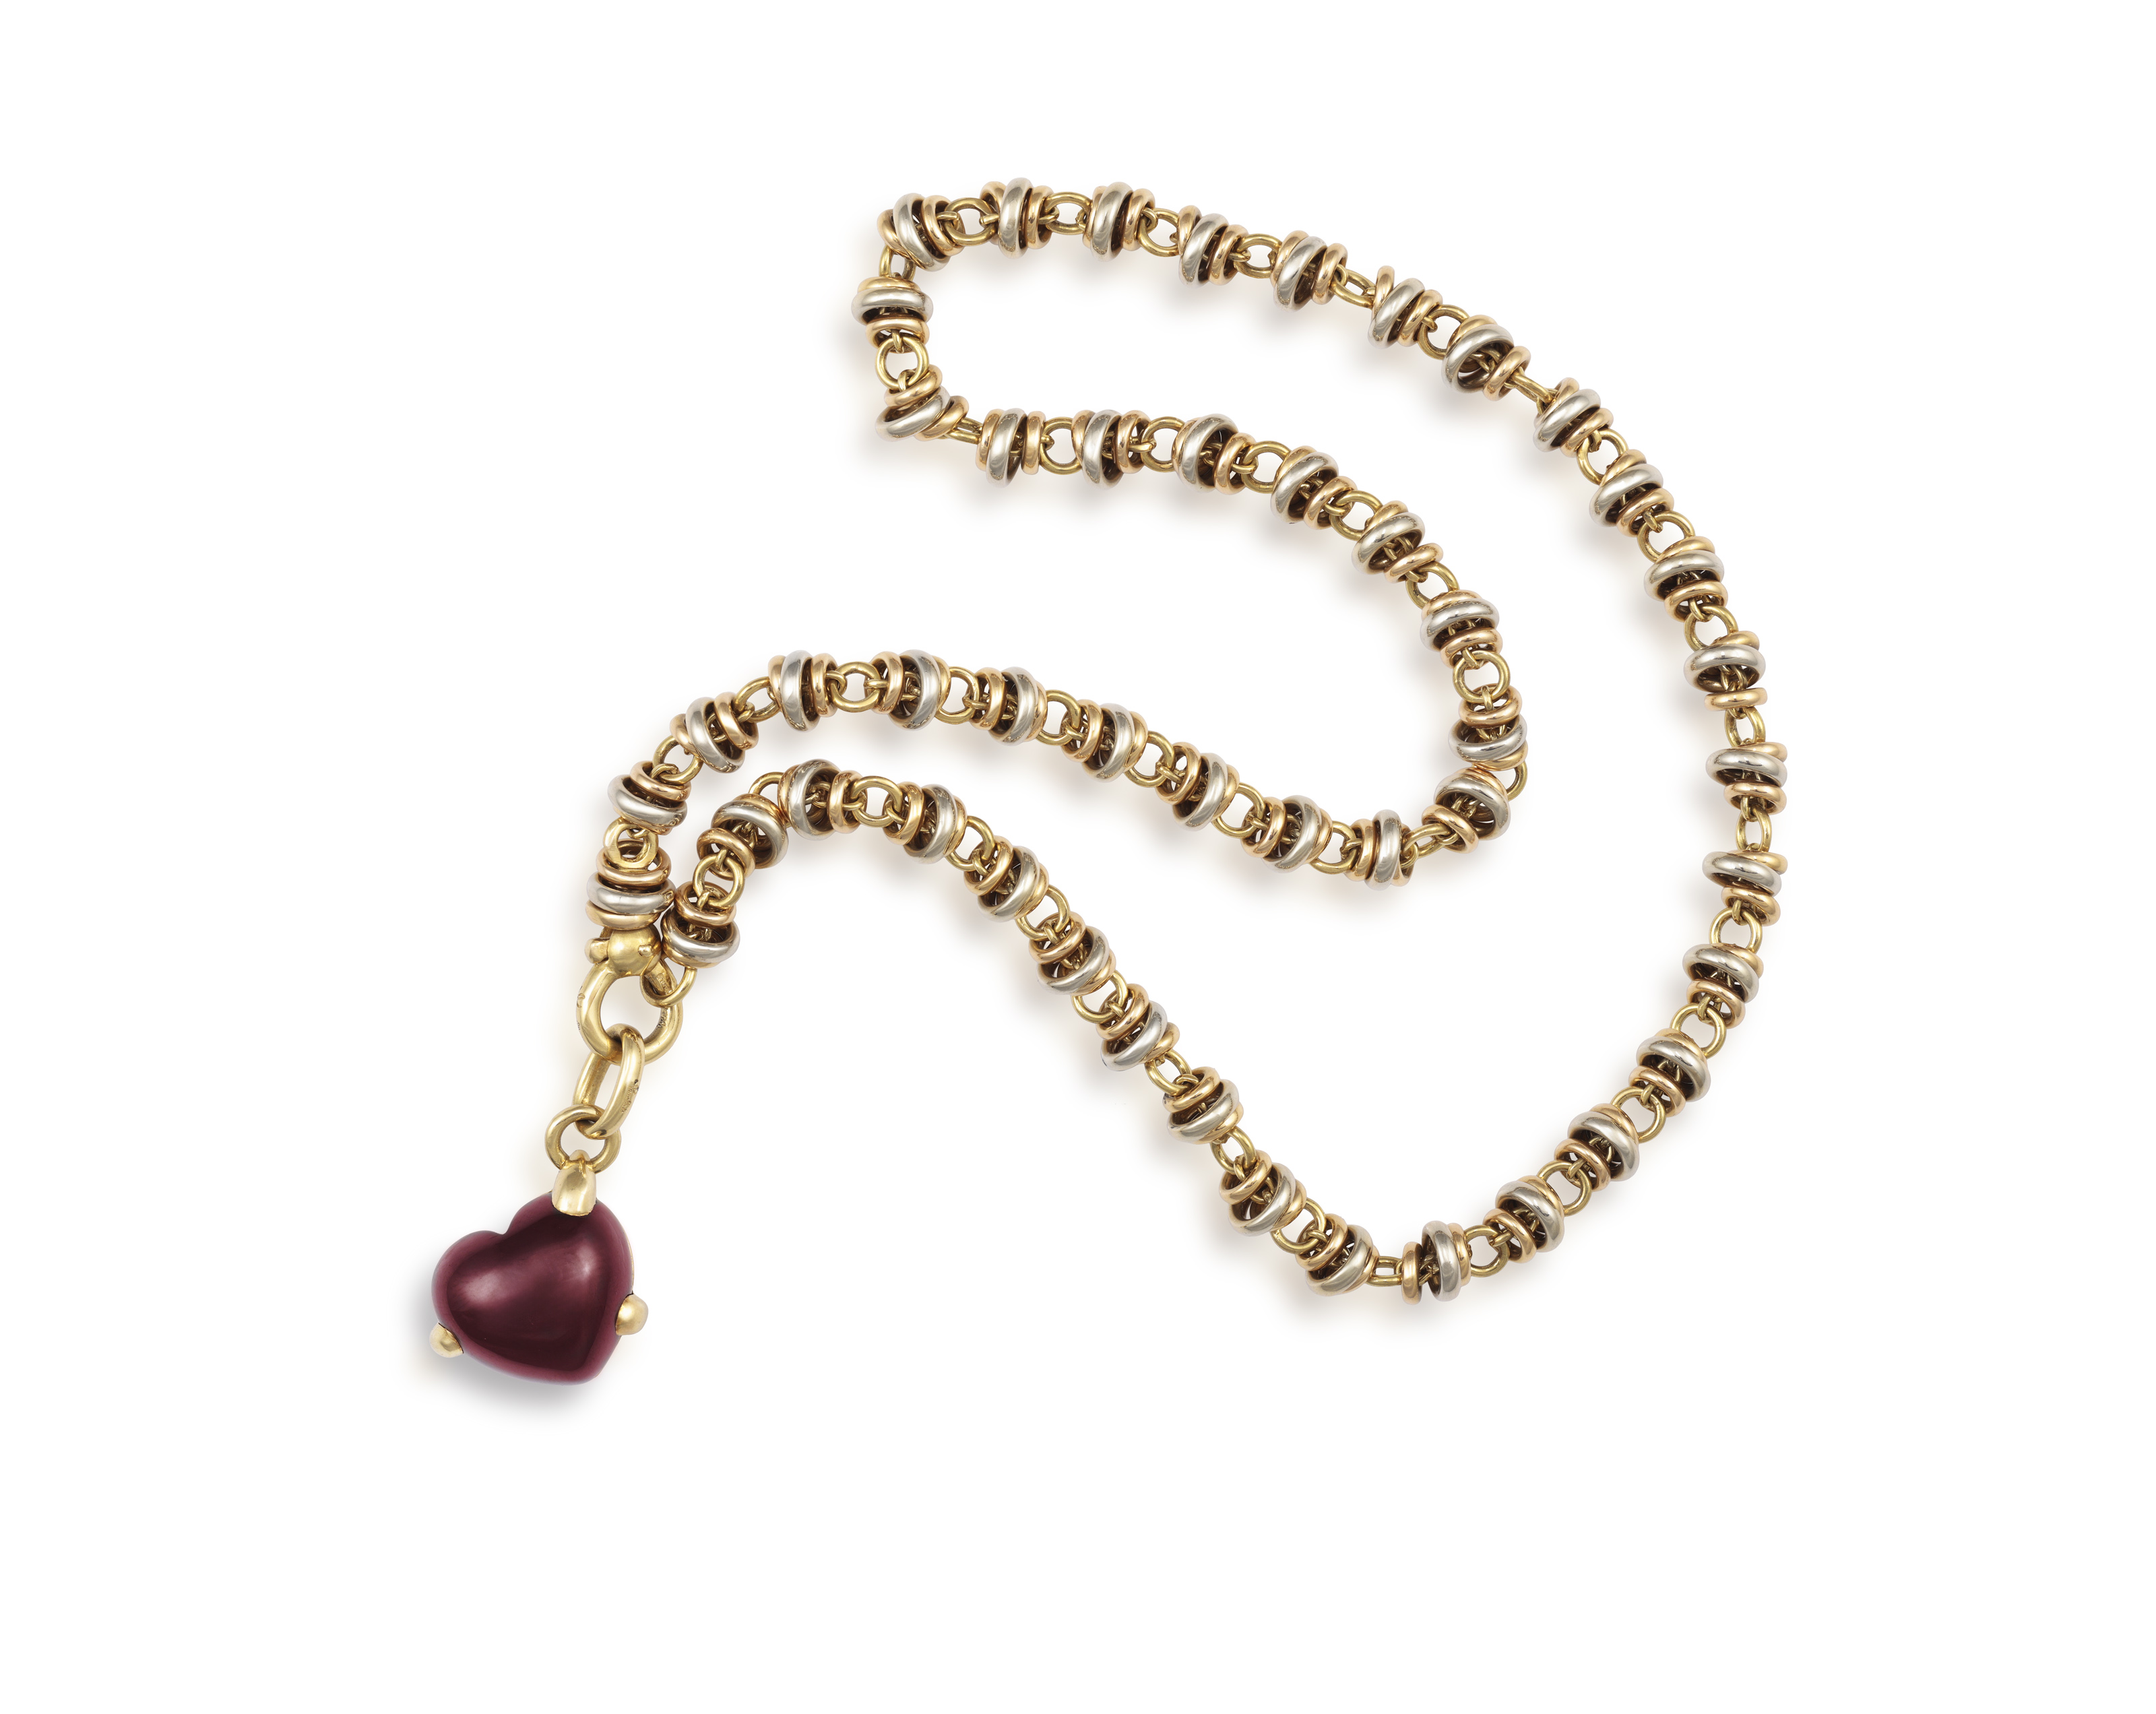 A GOLD NECKLACE WITH GARNET PENDANT, BY POMELLATO The detachable pendant set with a heart-shaped - Image 2 of 4